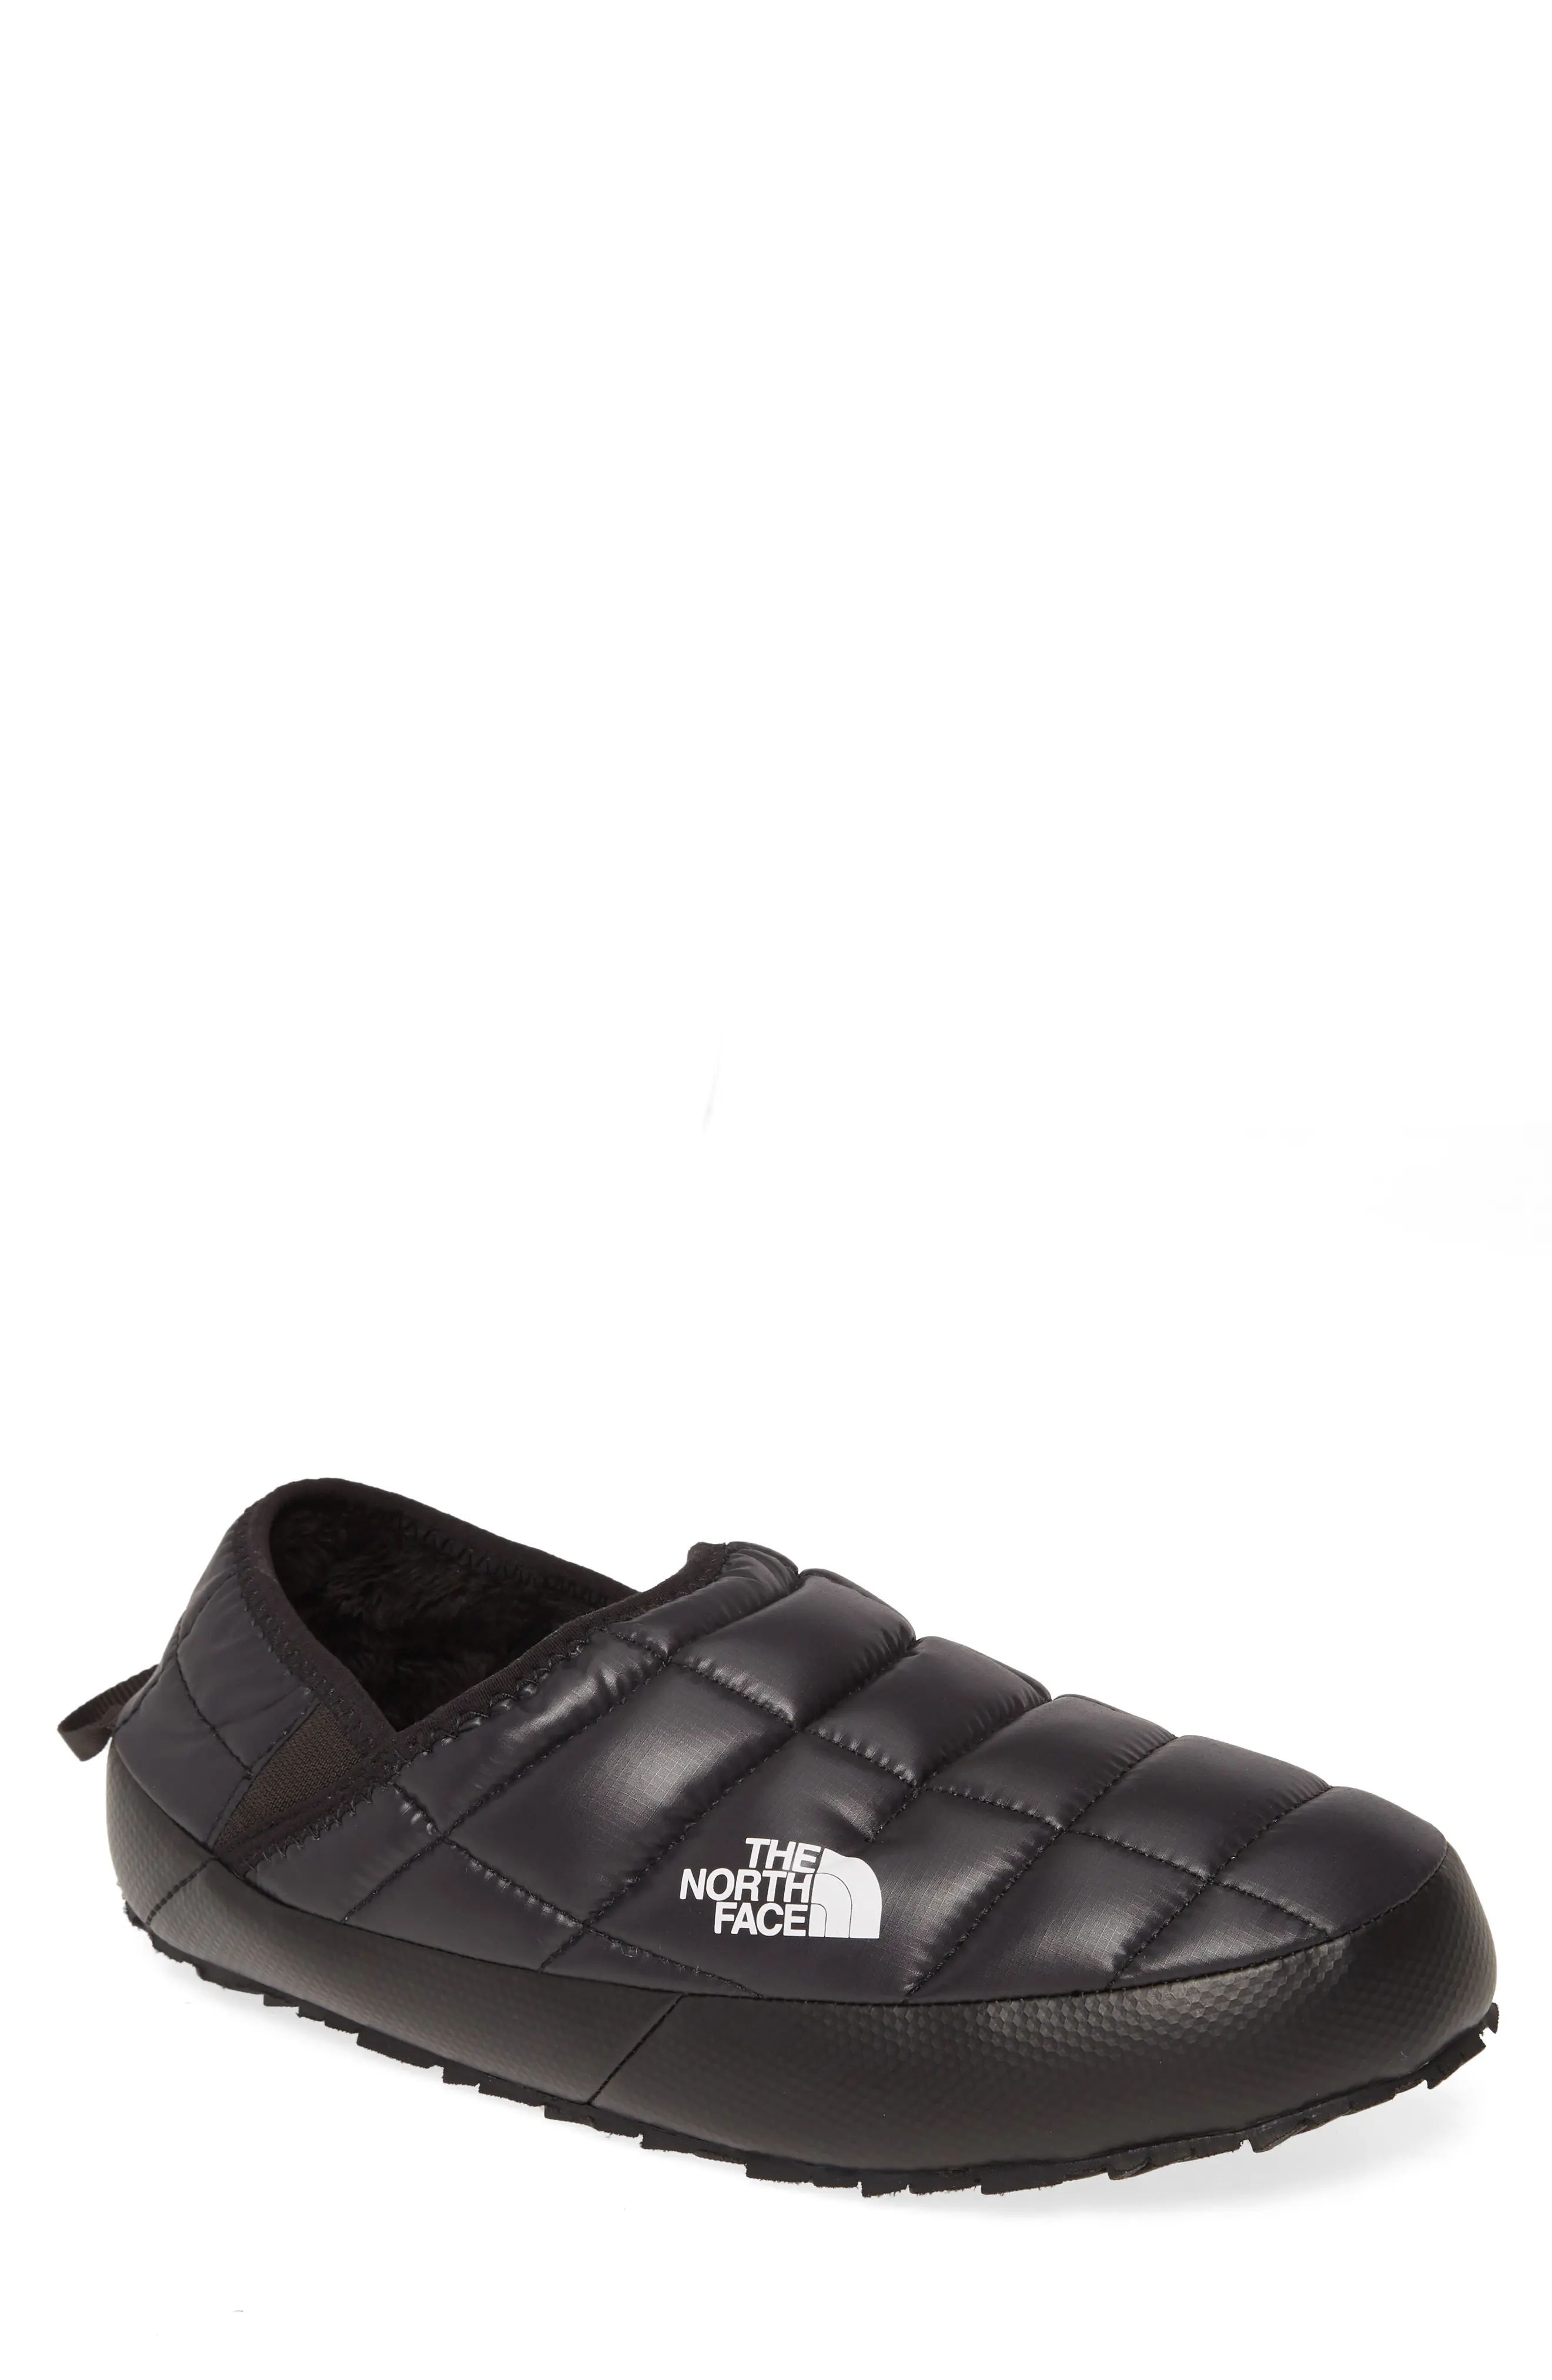 The North Face ThermoBall(TM) Traction Water Resistant Slipper, Size 10 in Tnf Black/Tnf White at No | Nordstrom